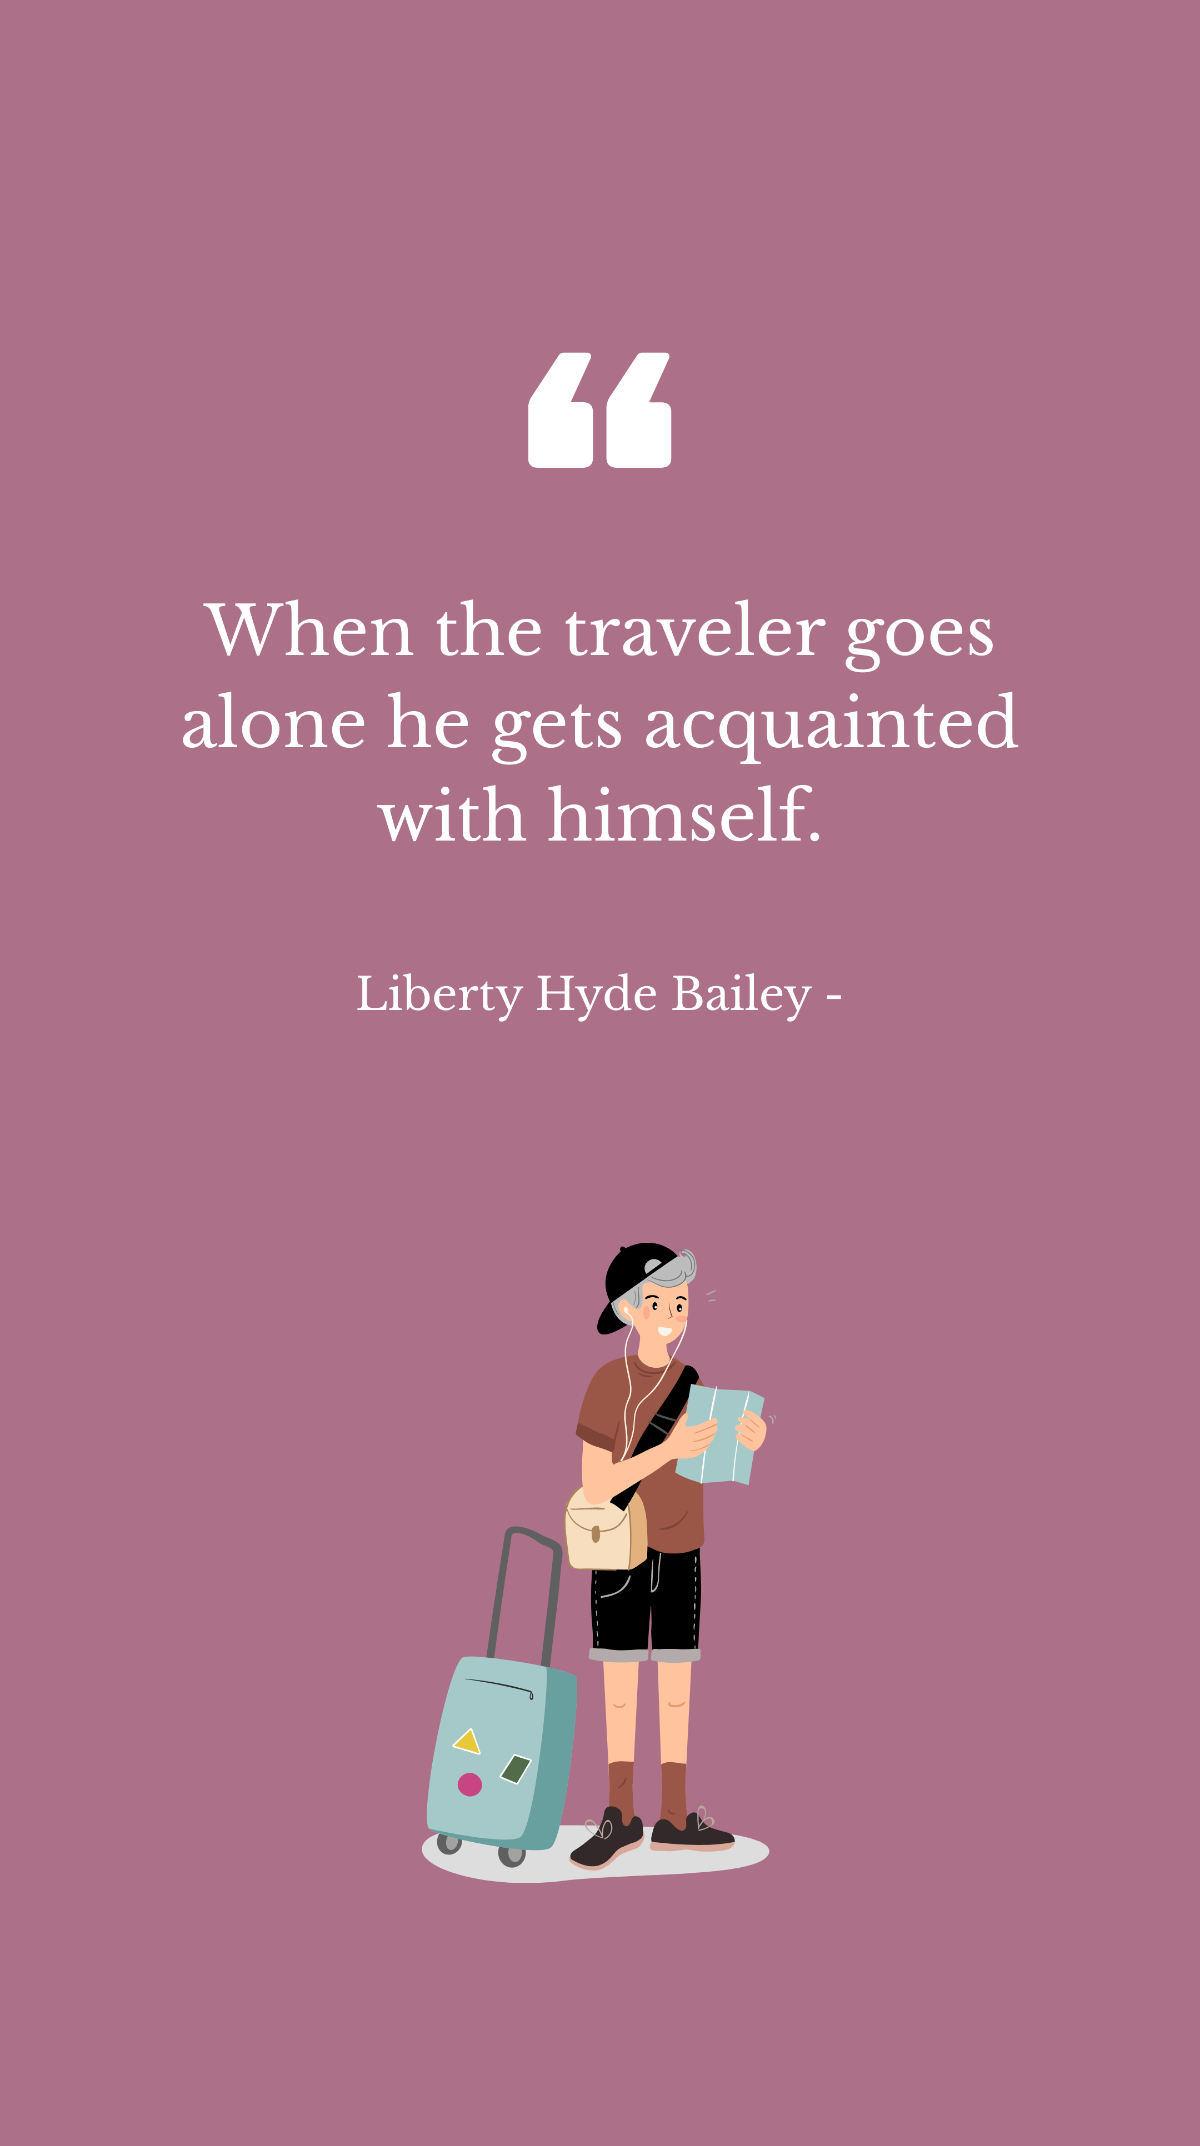 Free Liberty Hyde Bailey - When the traveler goes alone he gets acquainted with himself. Template